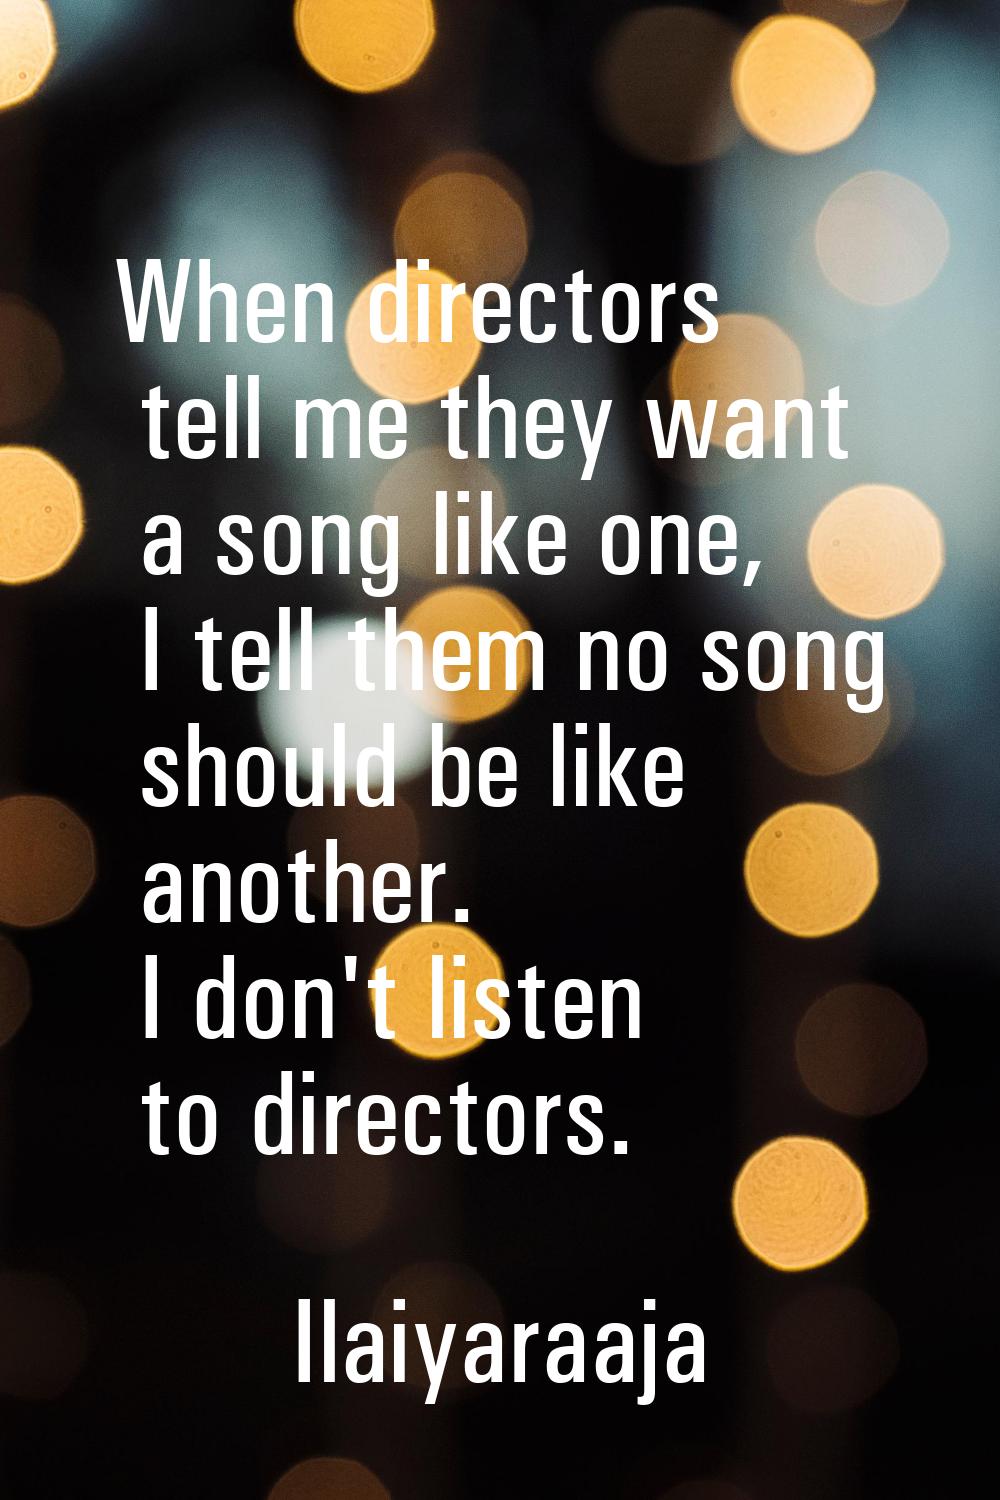 When directors tell me they want a song like one, I tell them no song should be like another. I don